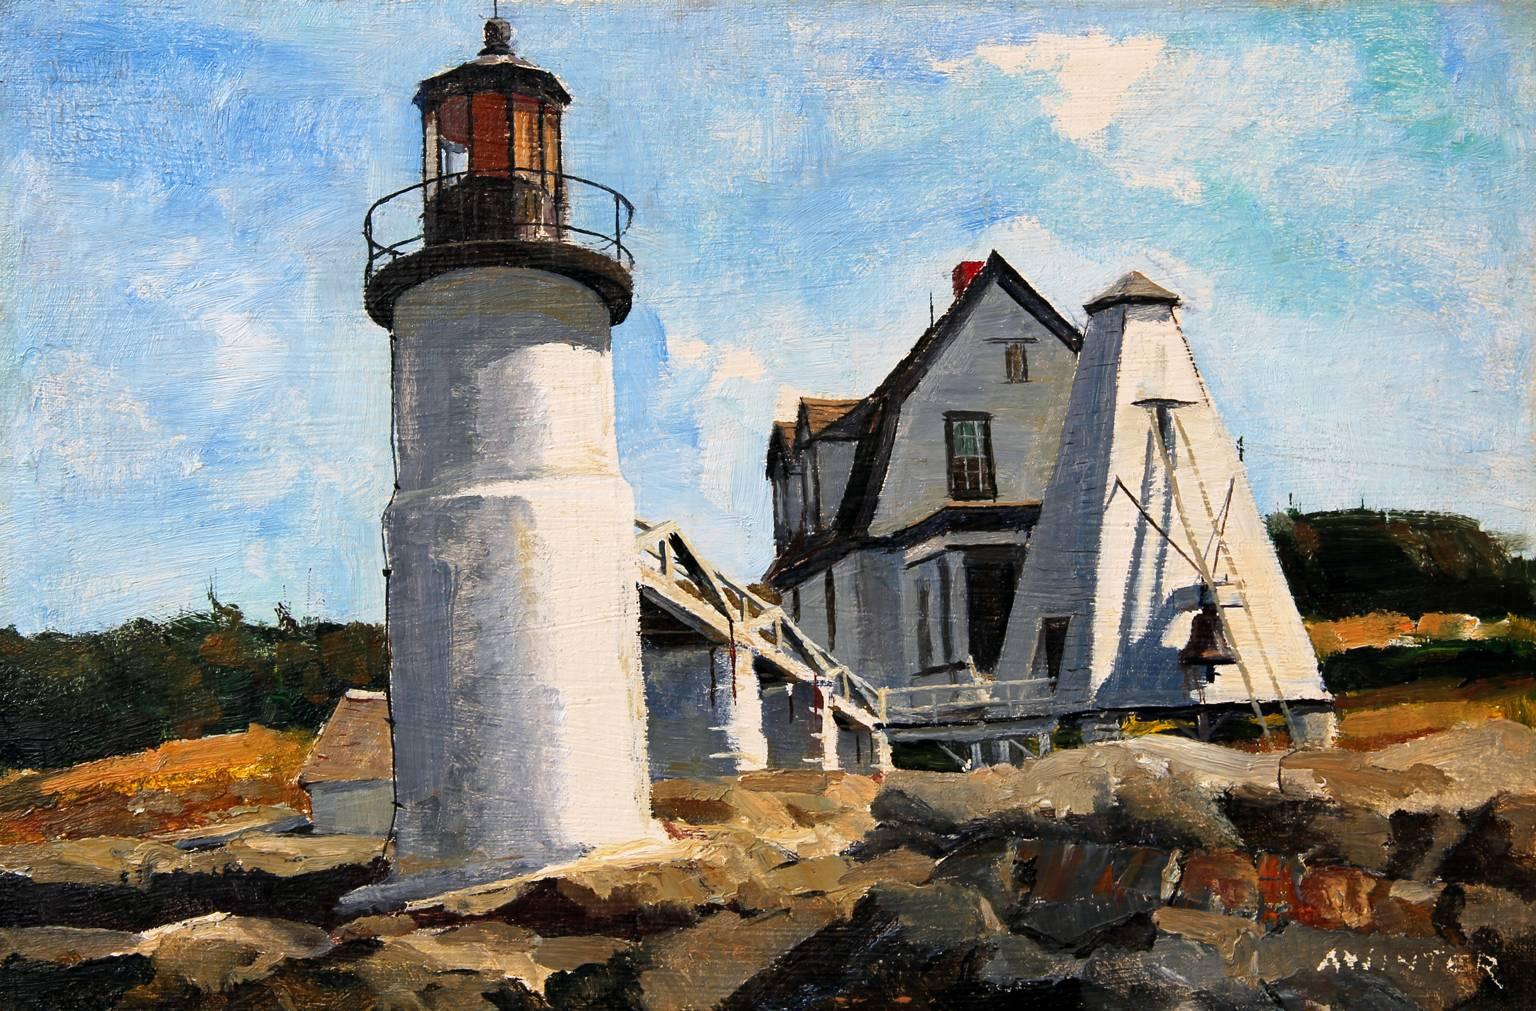 Andrew Winter Landscape Painting - Marshall Point Lighthouse, Port Clyde, Maine, Oil on Artists' Board, American